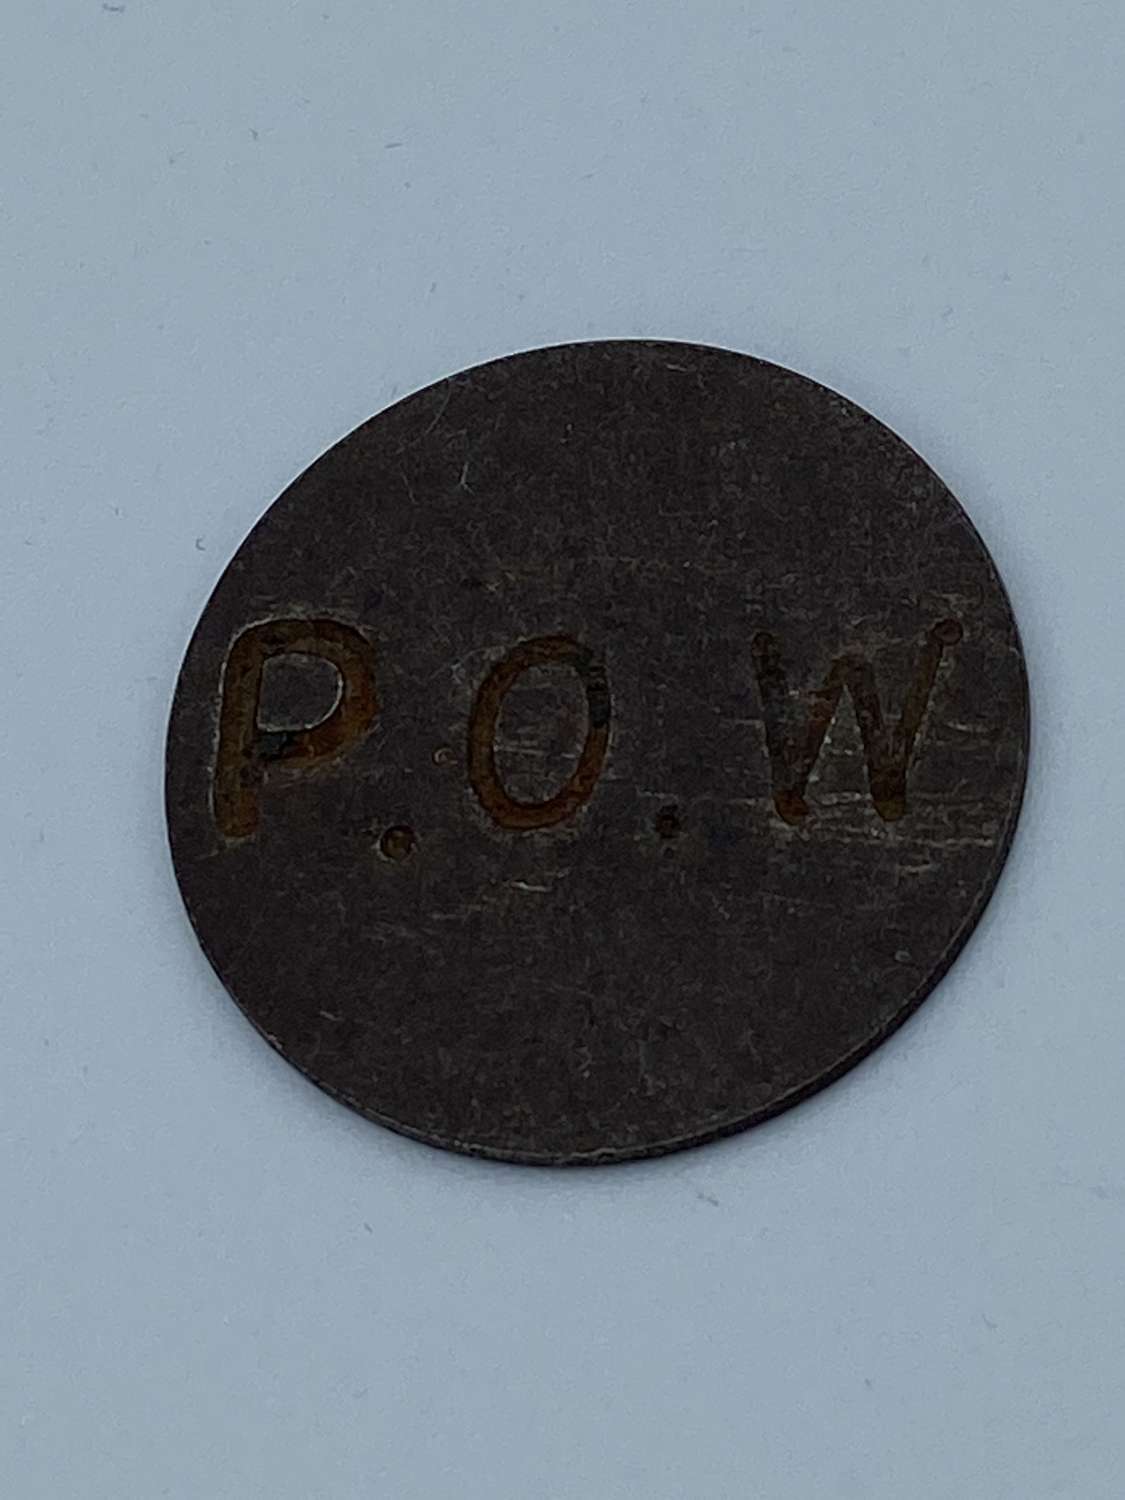 WW1 WW2 POW Prisoner Of War Trading Token Coin Currency Used In Stalag